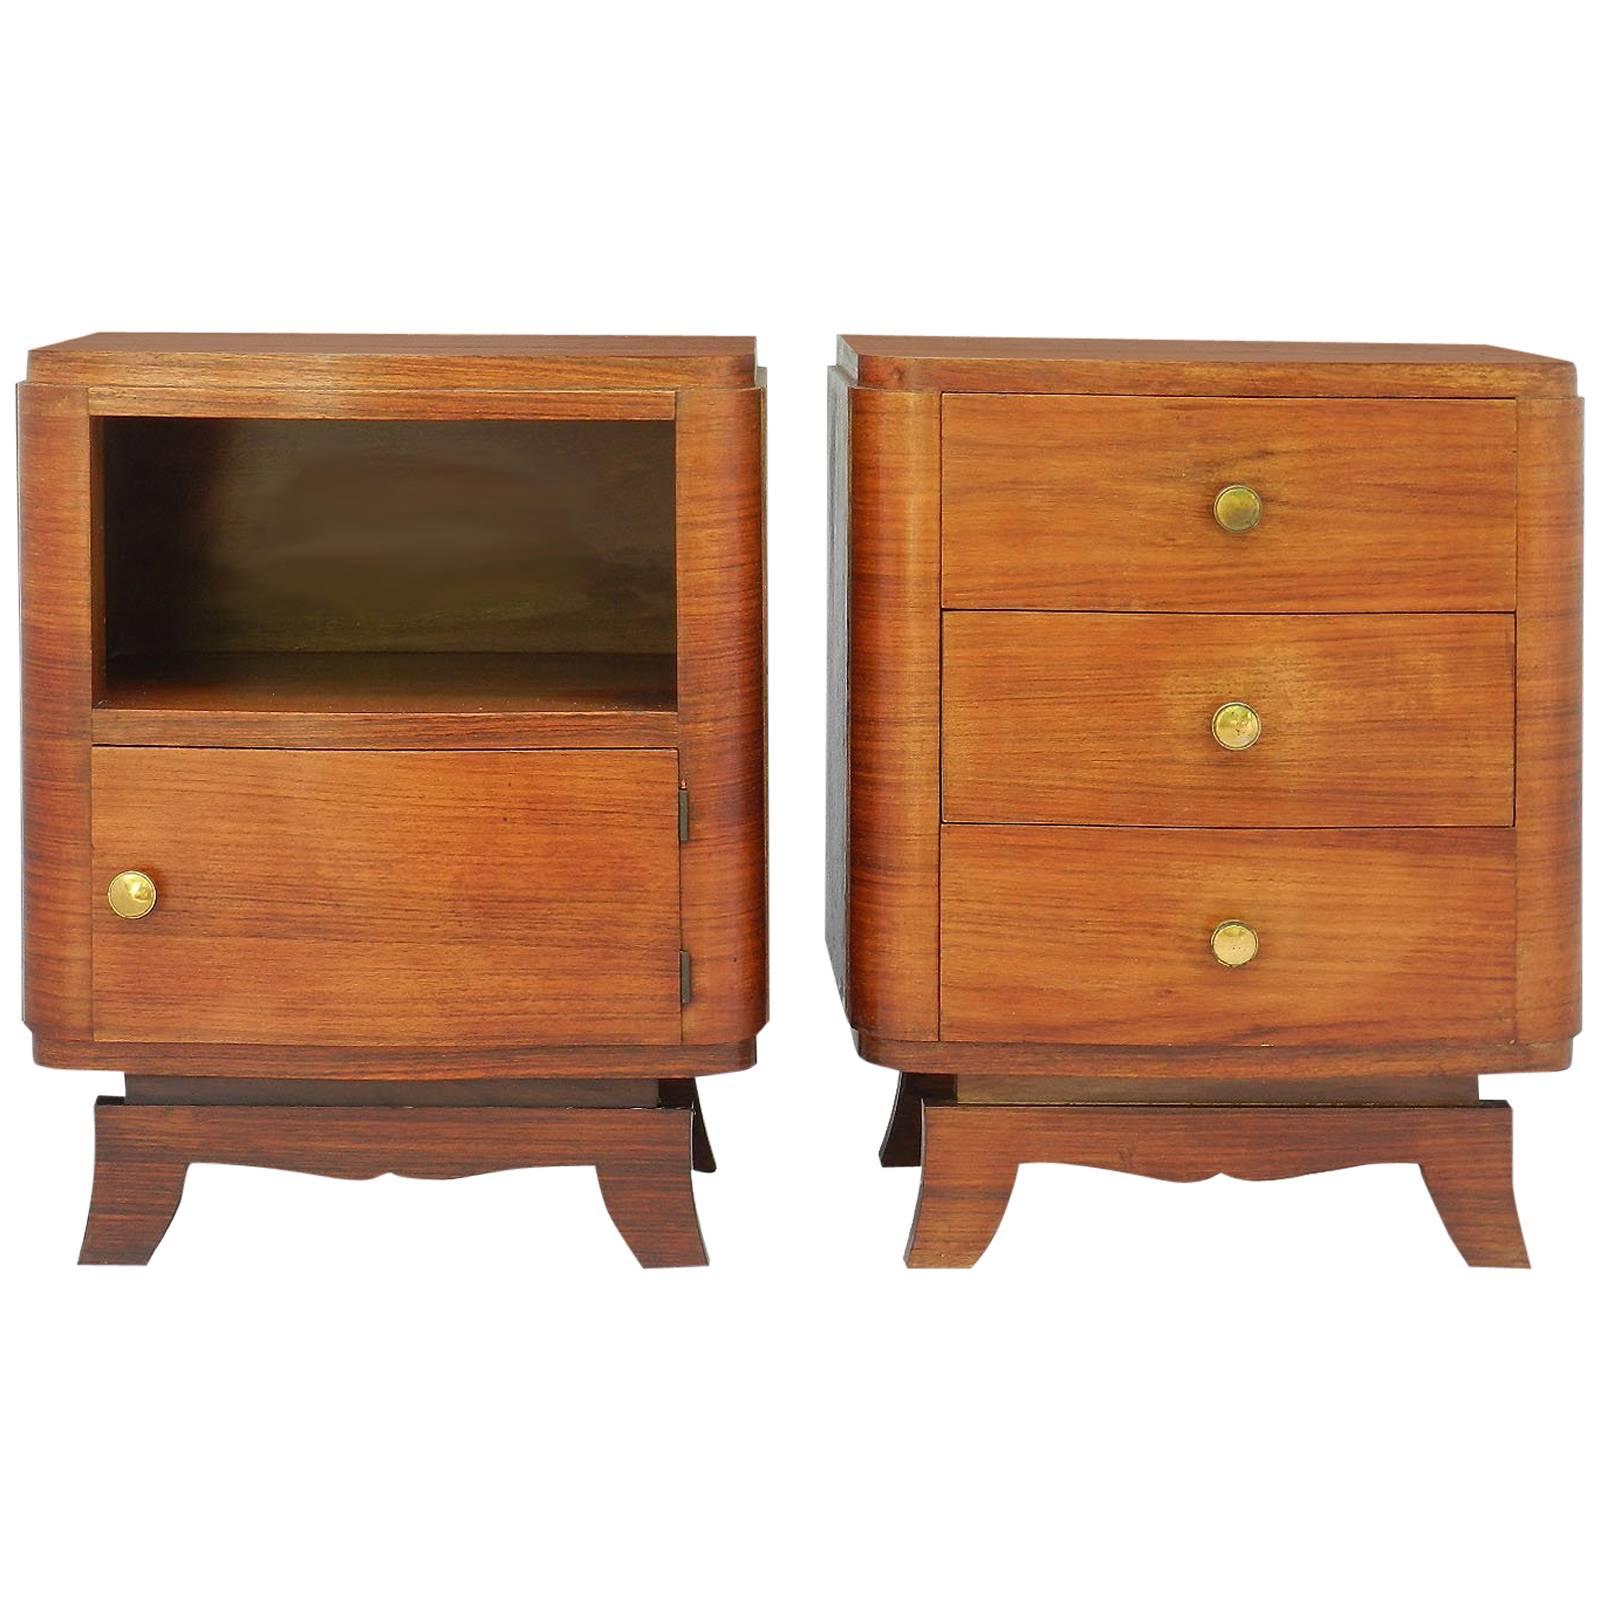 Pair of Art Deco Nightstands French Side Cabinets Bedside Tables, 1930s